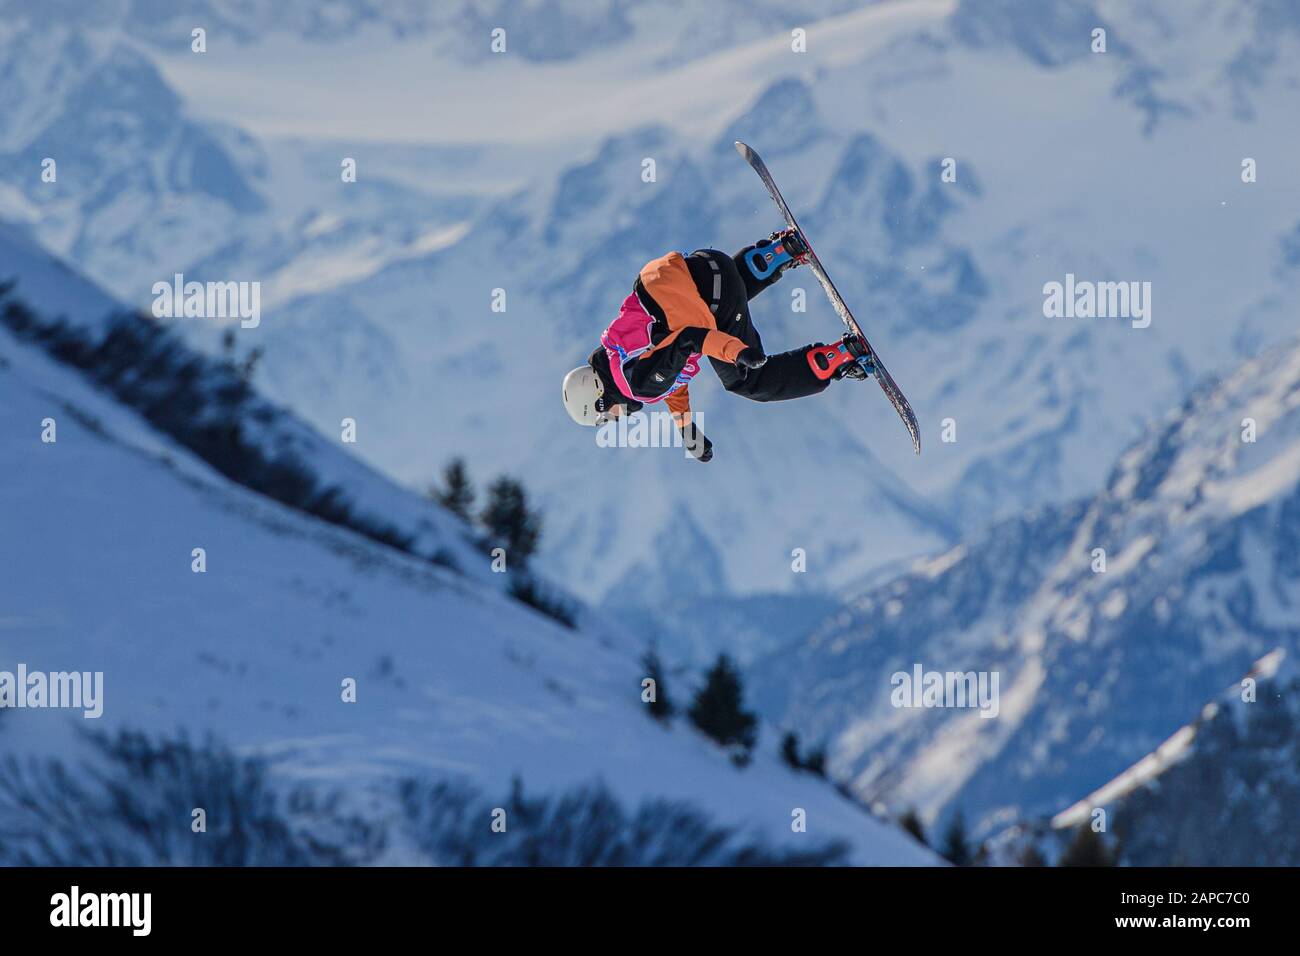 LAUSANNE, SWITZERLAND. 22th, Jan 2020.  competes in the Snowboard: Men's Big Air competitions during the Lausanne 2020 Youth Olympic Games at Leysin Park & Pipe on Wednesday, 22 January 2020. LAUSANNE, SWITZERLAND. Credit: Taka G Wu/Alamy Live News Stock Photo